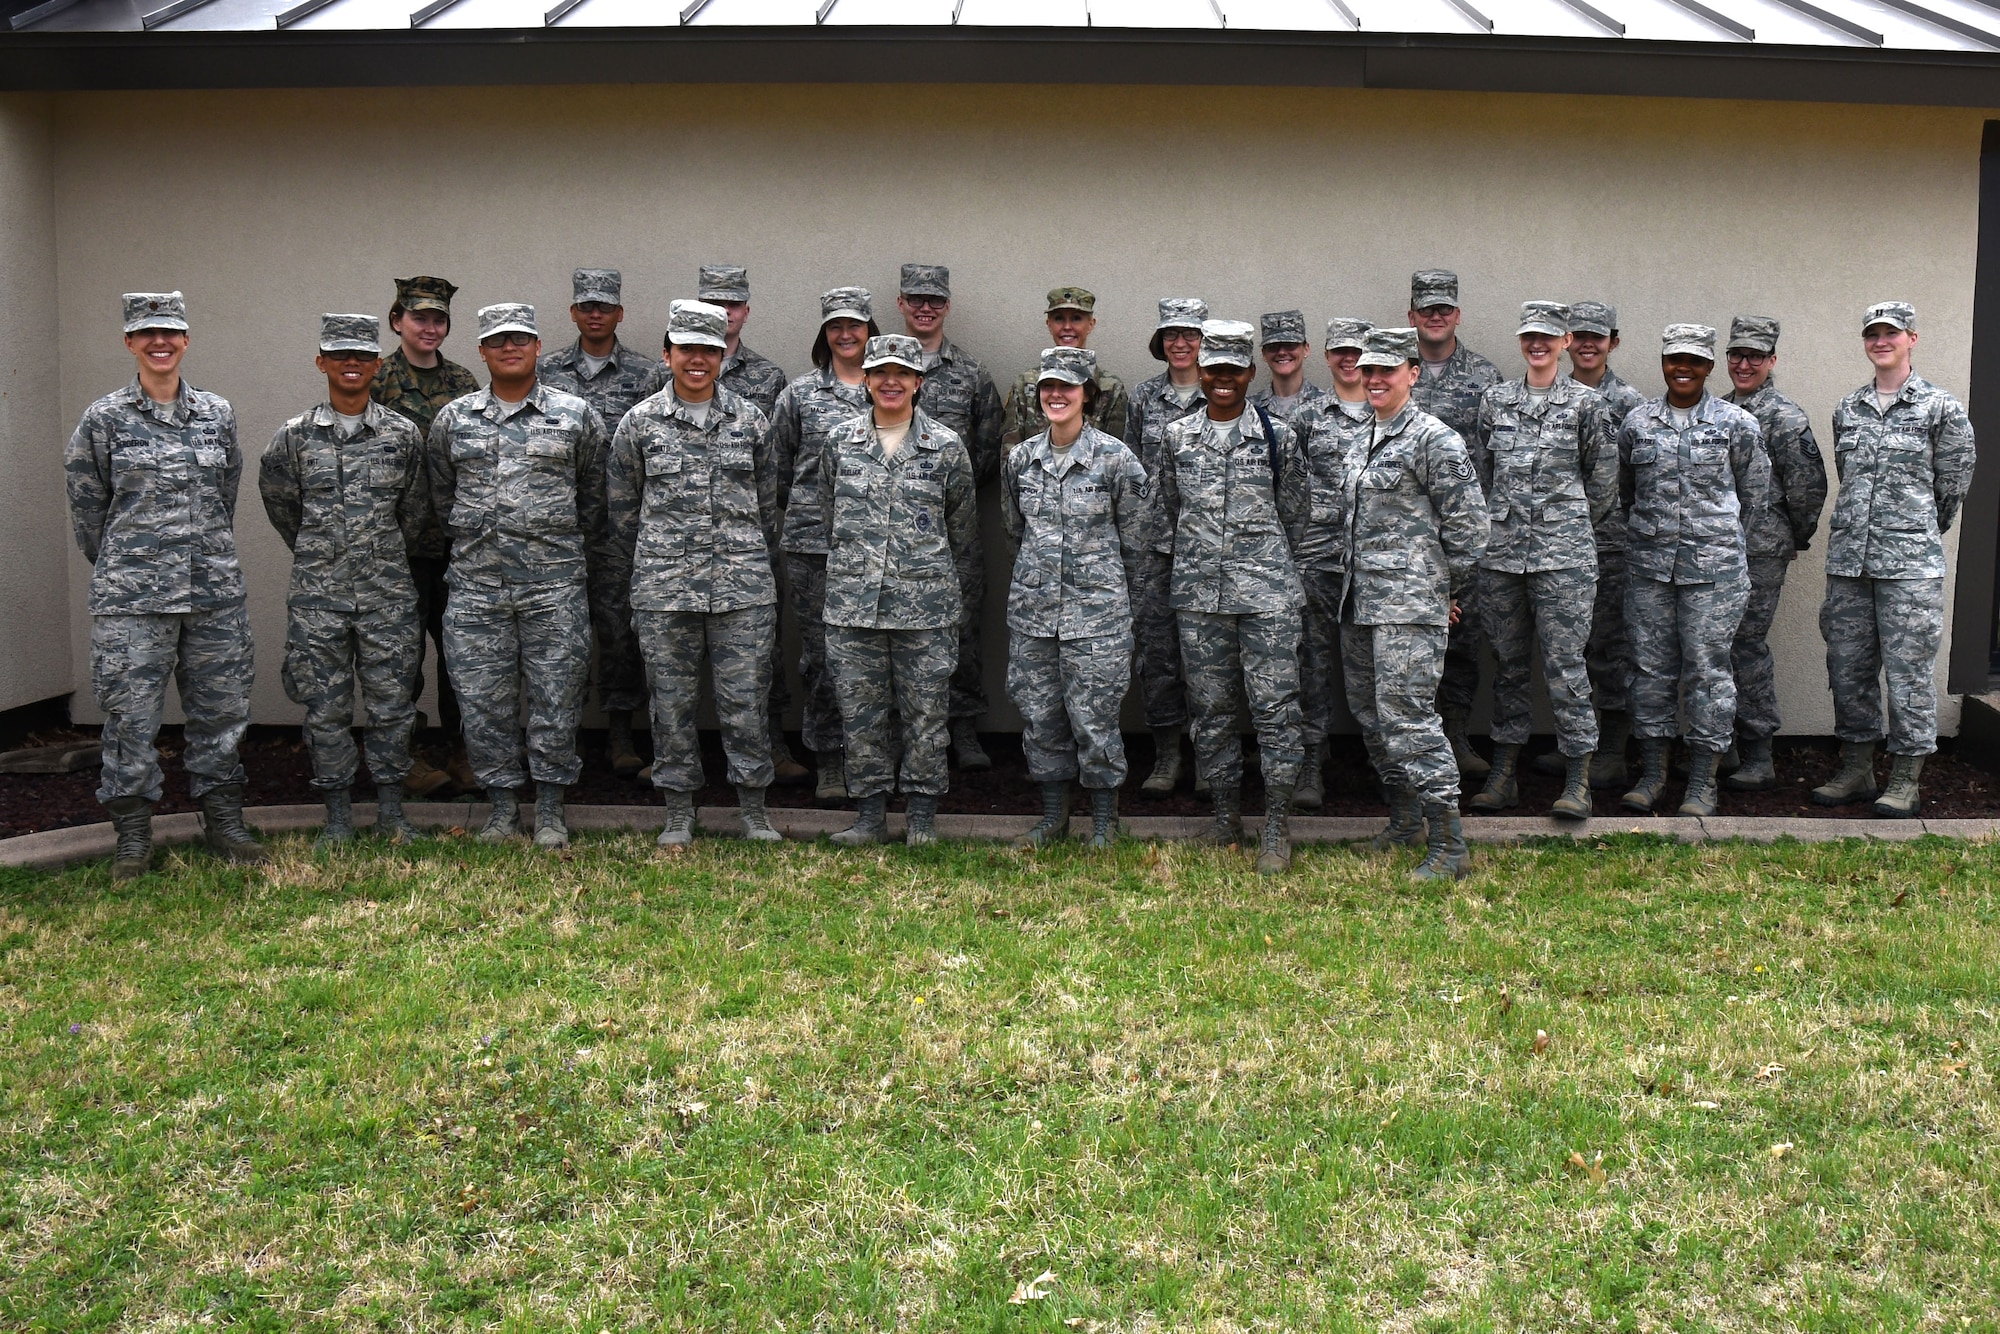 Mentors and mentees take a moment for a picture before heading back to work after the speed mentoring event hosted by the 17th Force Support Squadron at the Airman Family Readiness Center on Goodfellow Air Force Base, Texas, March 12, 2018. In recognition of Women’s History Month, service members were invited to attend a mentoring session with various military members stationed at Goodfellow. (U.S. Air Force photo by Airman 1st Class Seraiah Hines/Released)